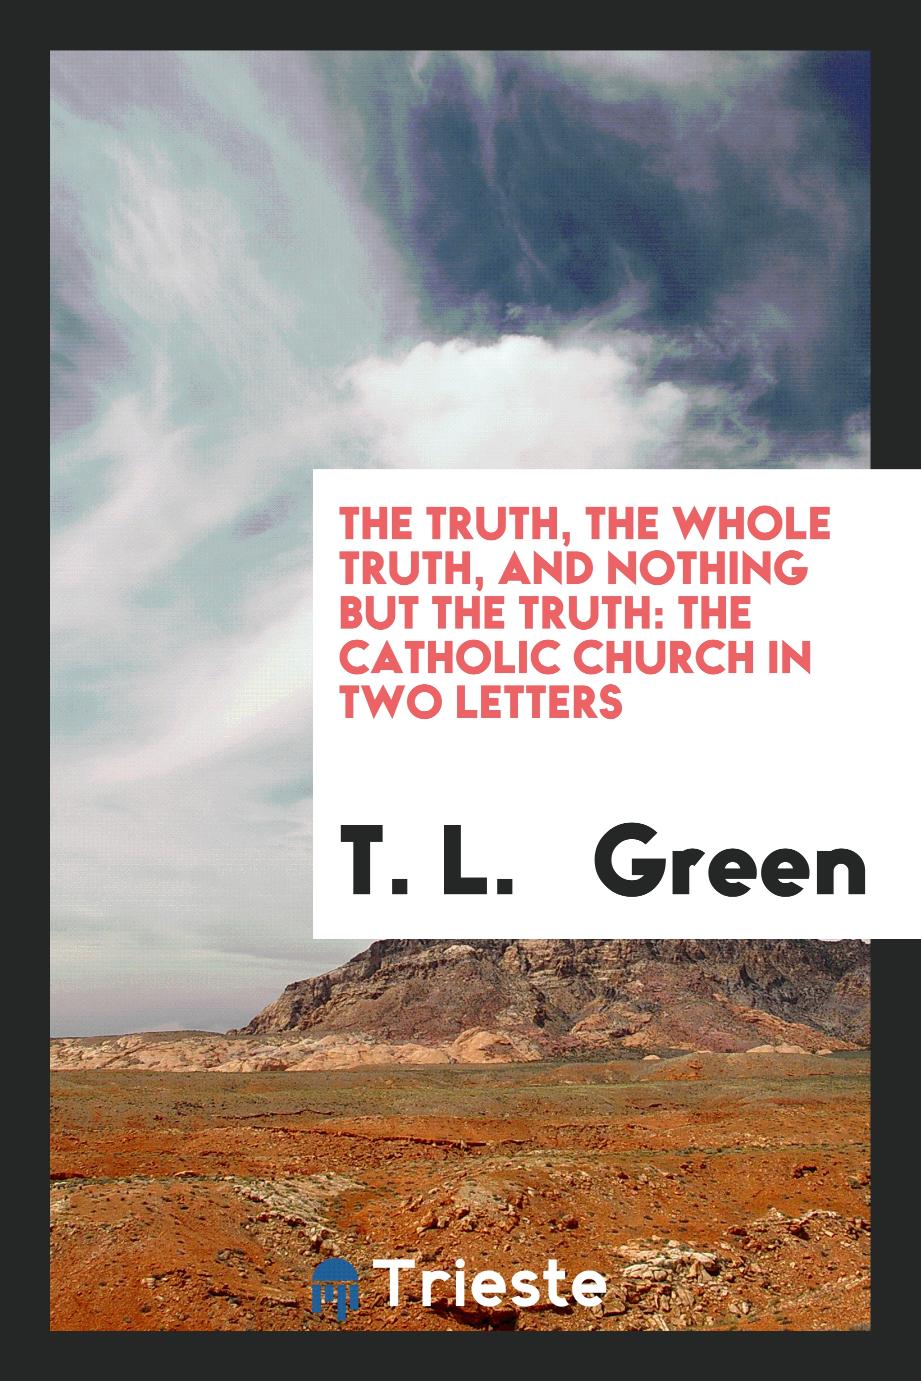 The truth, the whole truth, and nothing but the truth: The Catholic Church in two letters